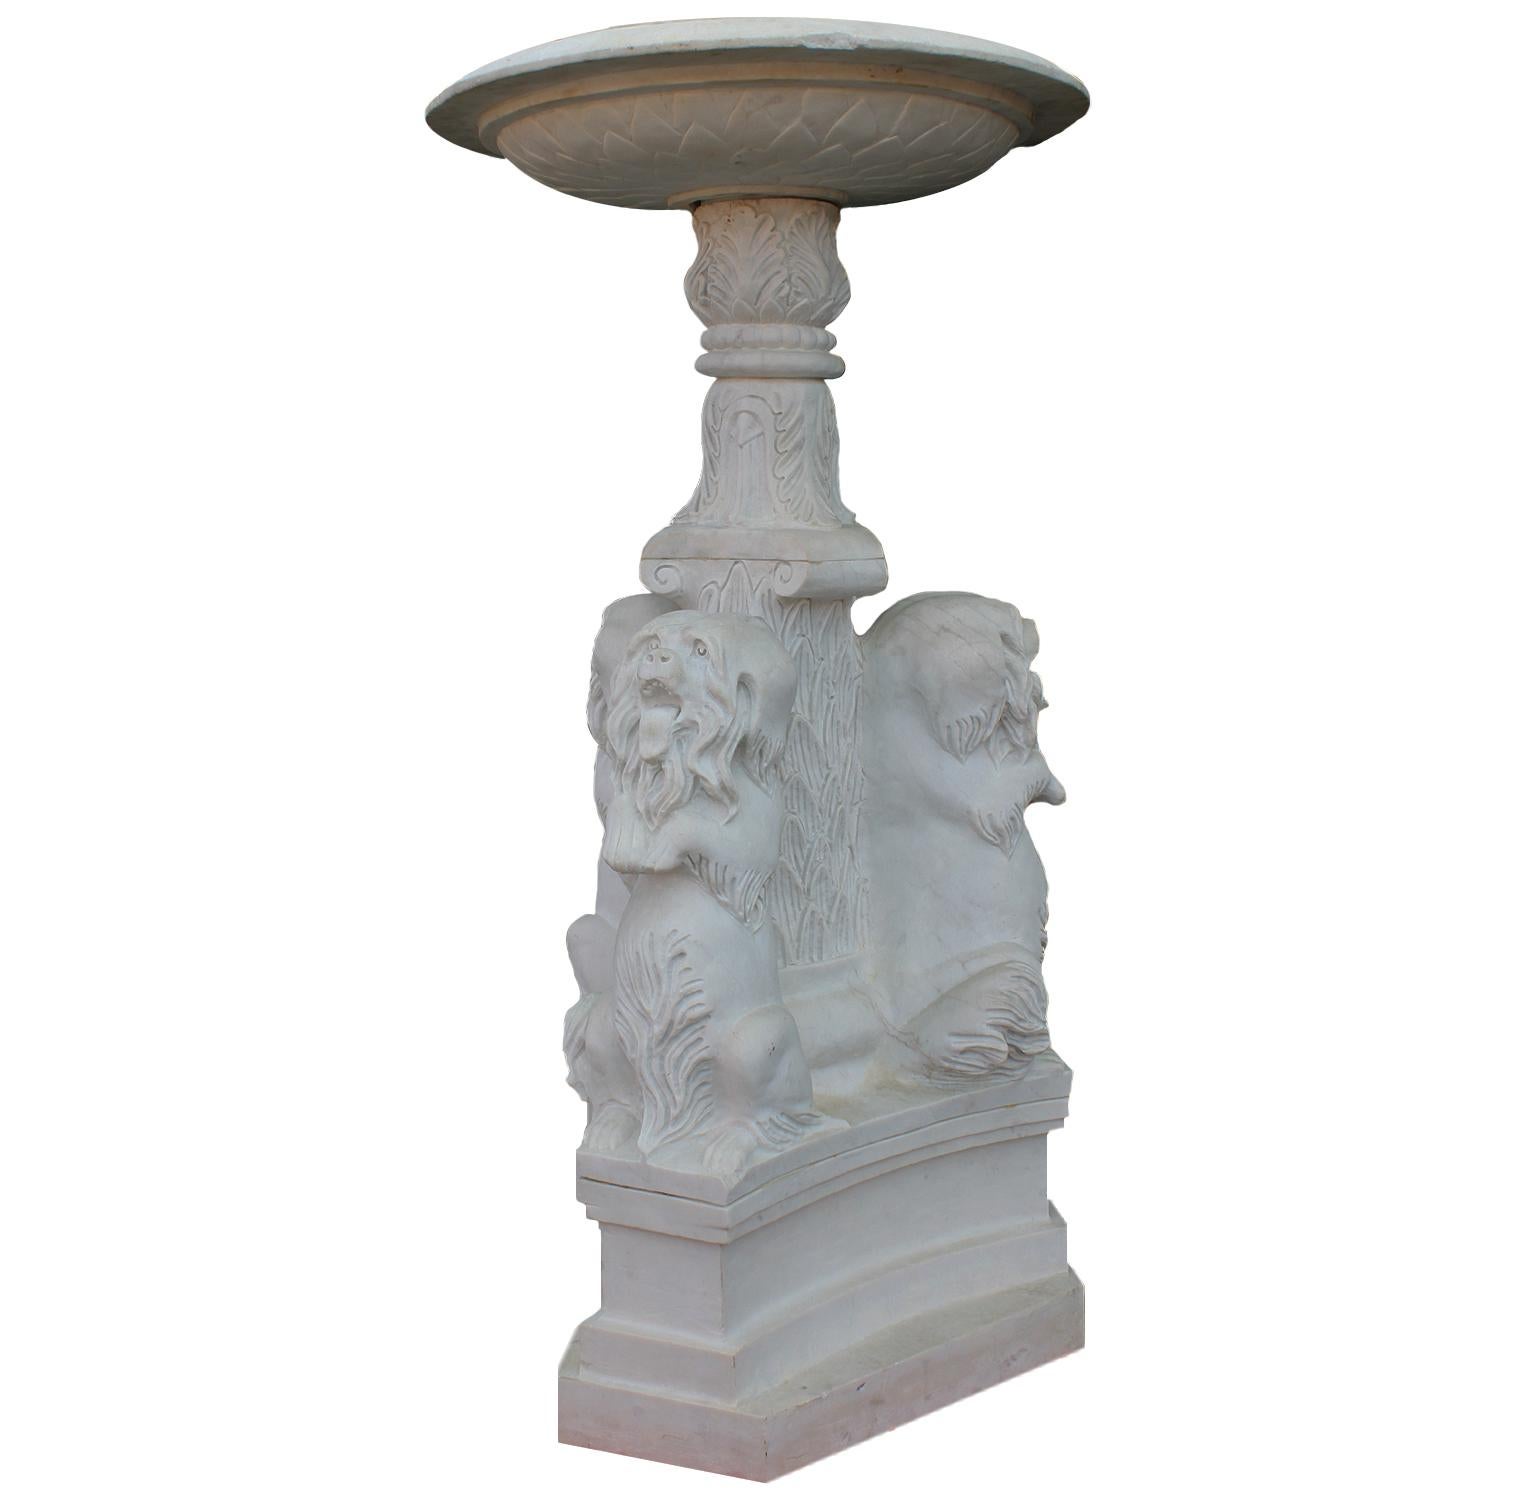 Whimsical English 19th-20th Century White Marble Figural Outdoor Dog Fountain For Sale